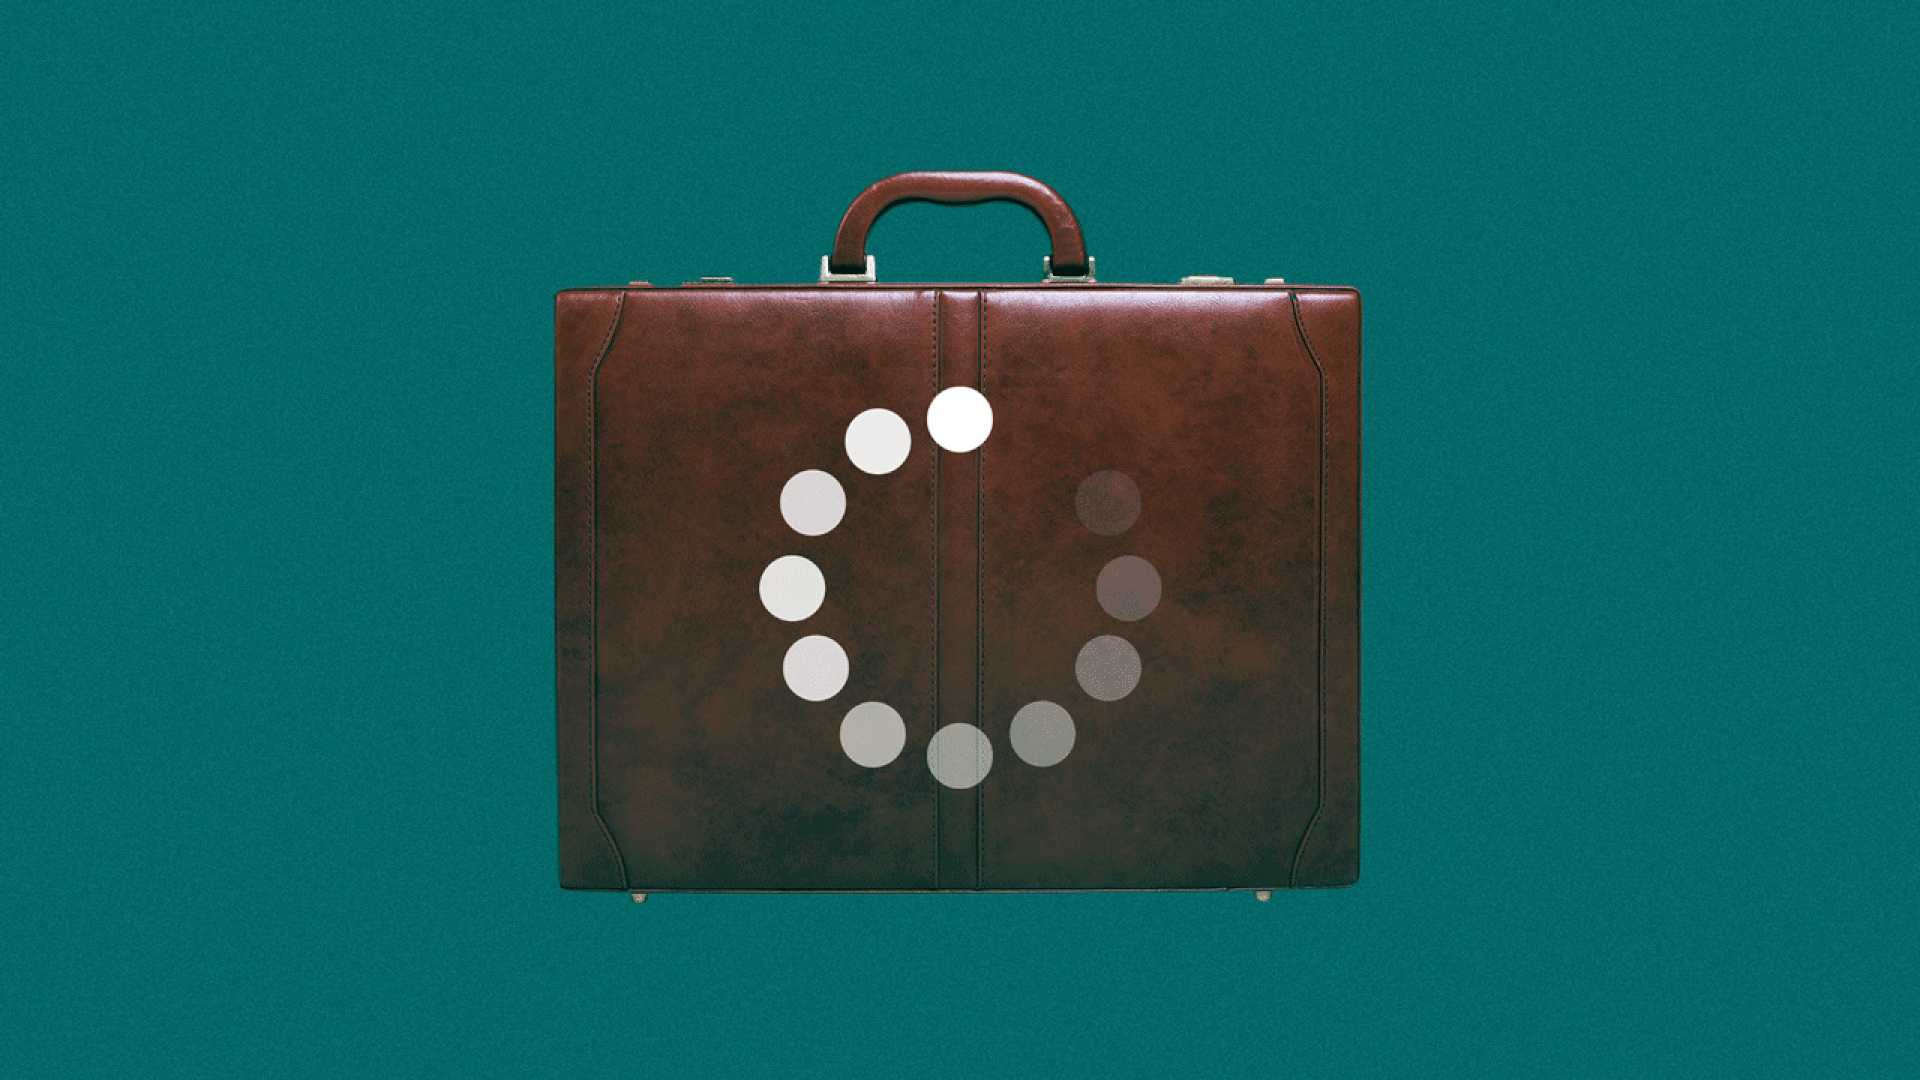 Animated illustration of a briefcase with a loading icon spinning endlessly